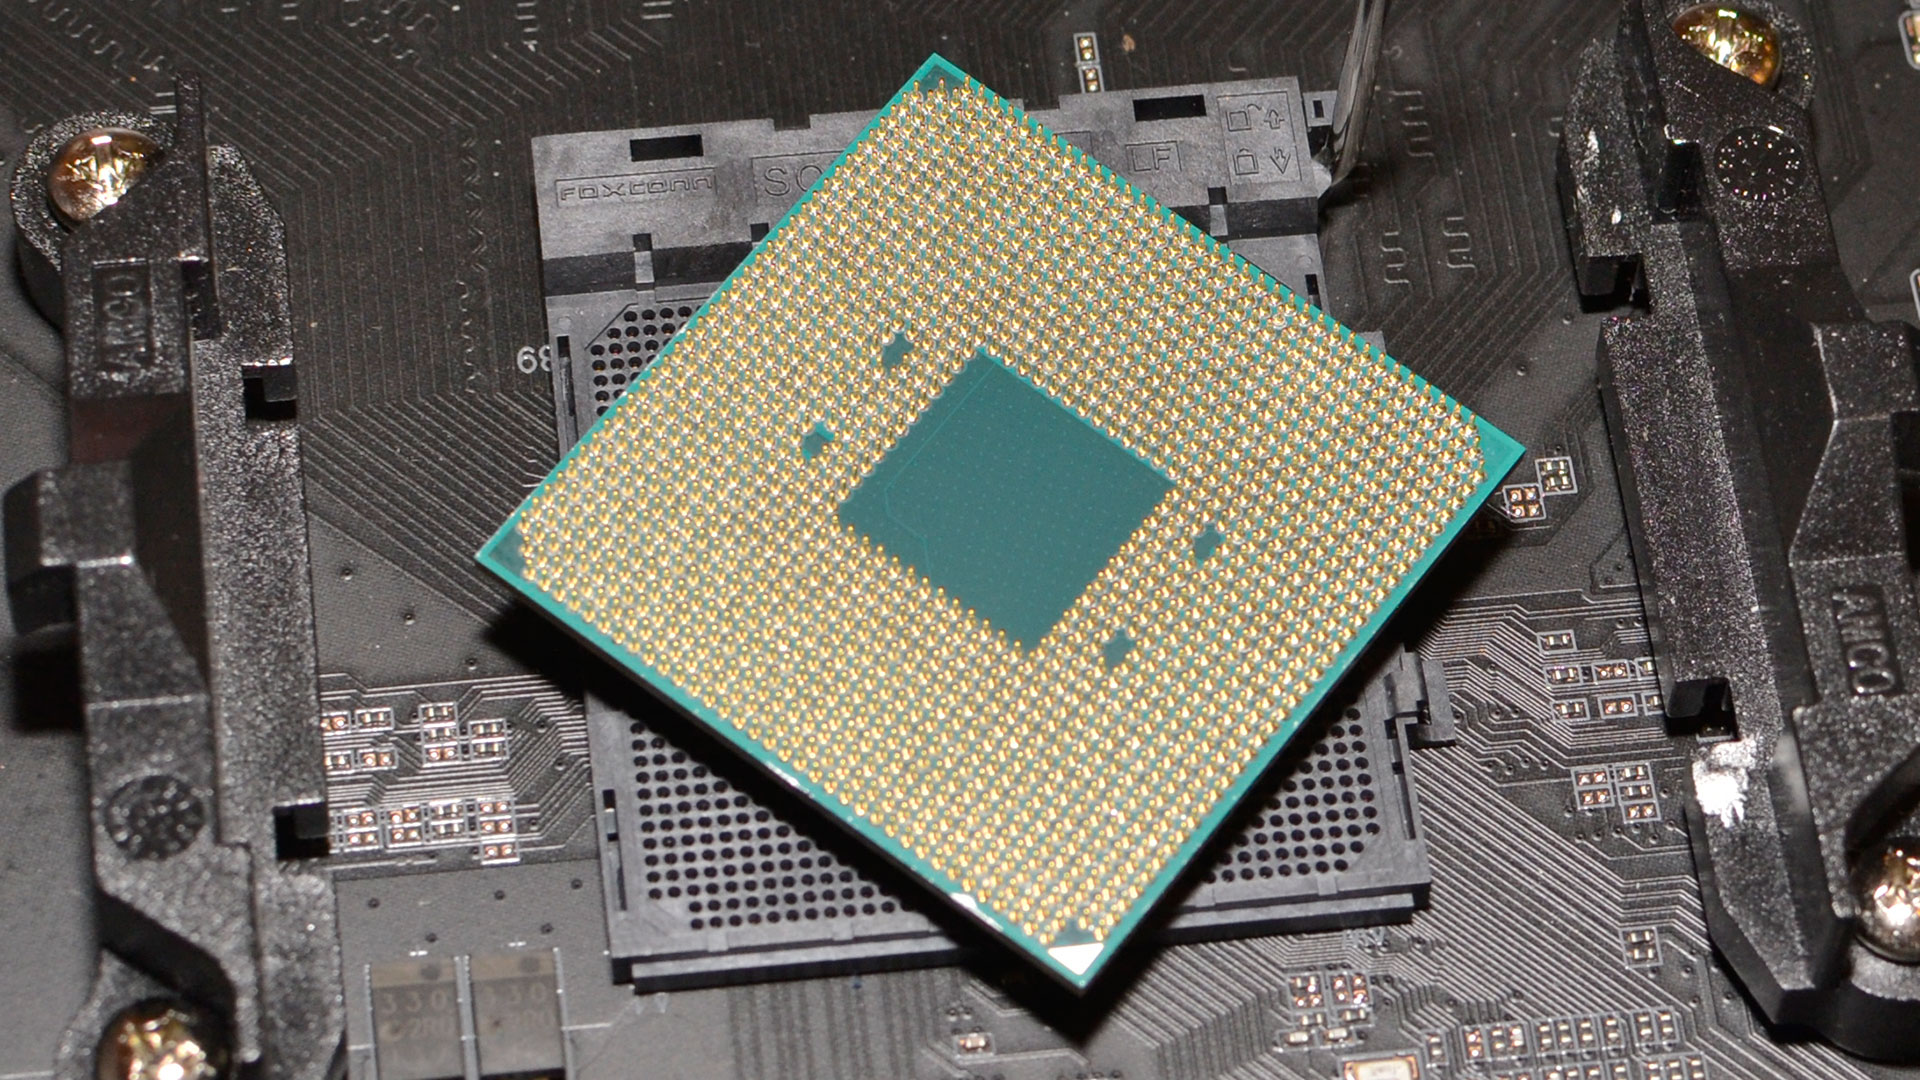 The new AM5 socket from AMD - What it is and why you really want it